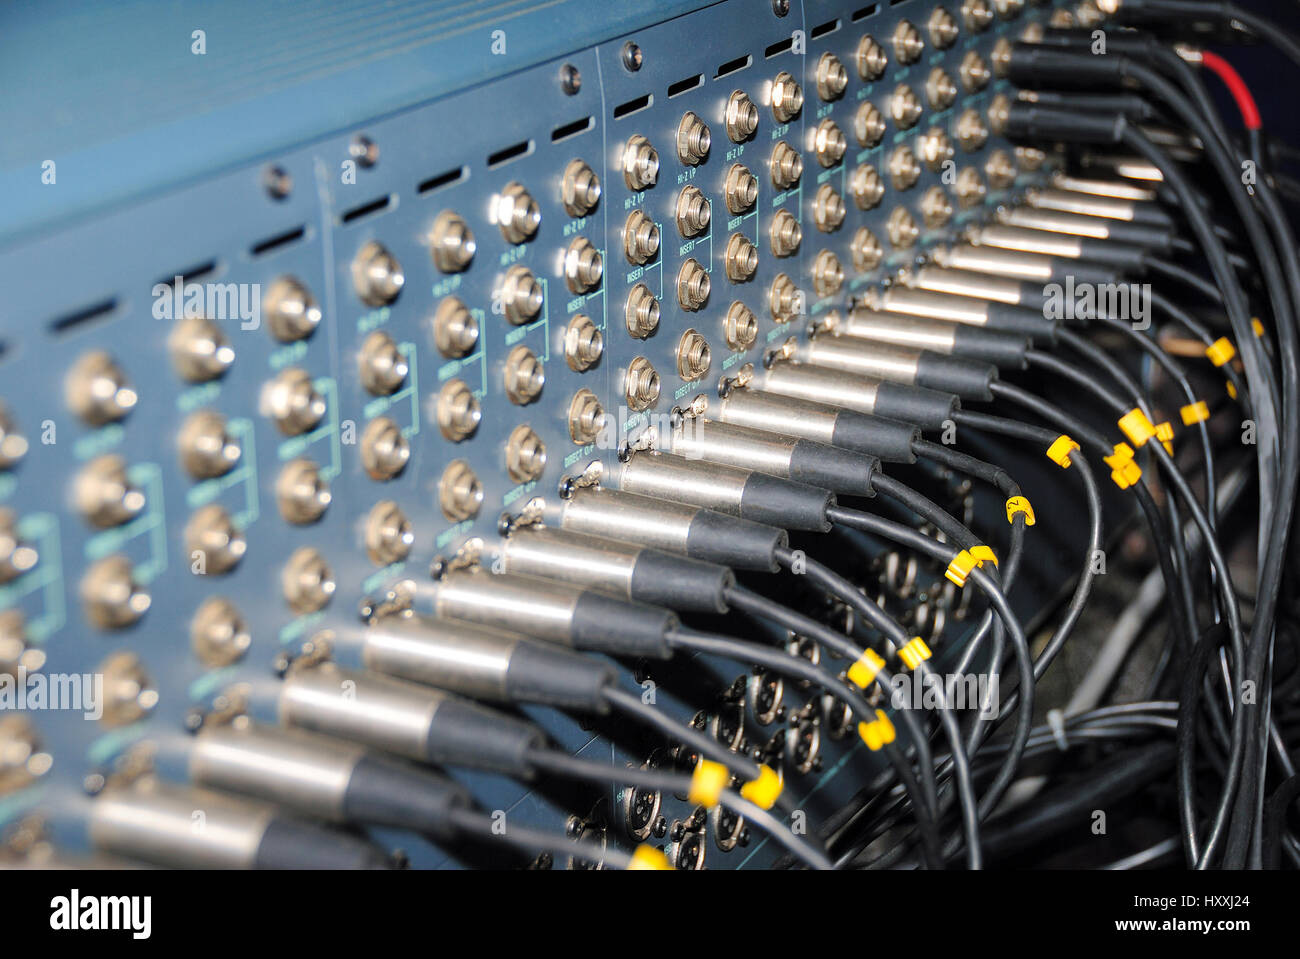 Mixing Sockets. Connections of a sound equipment proffesional xlr audio  patch panel Stock Photo - Alamy